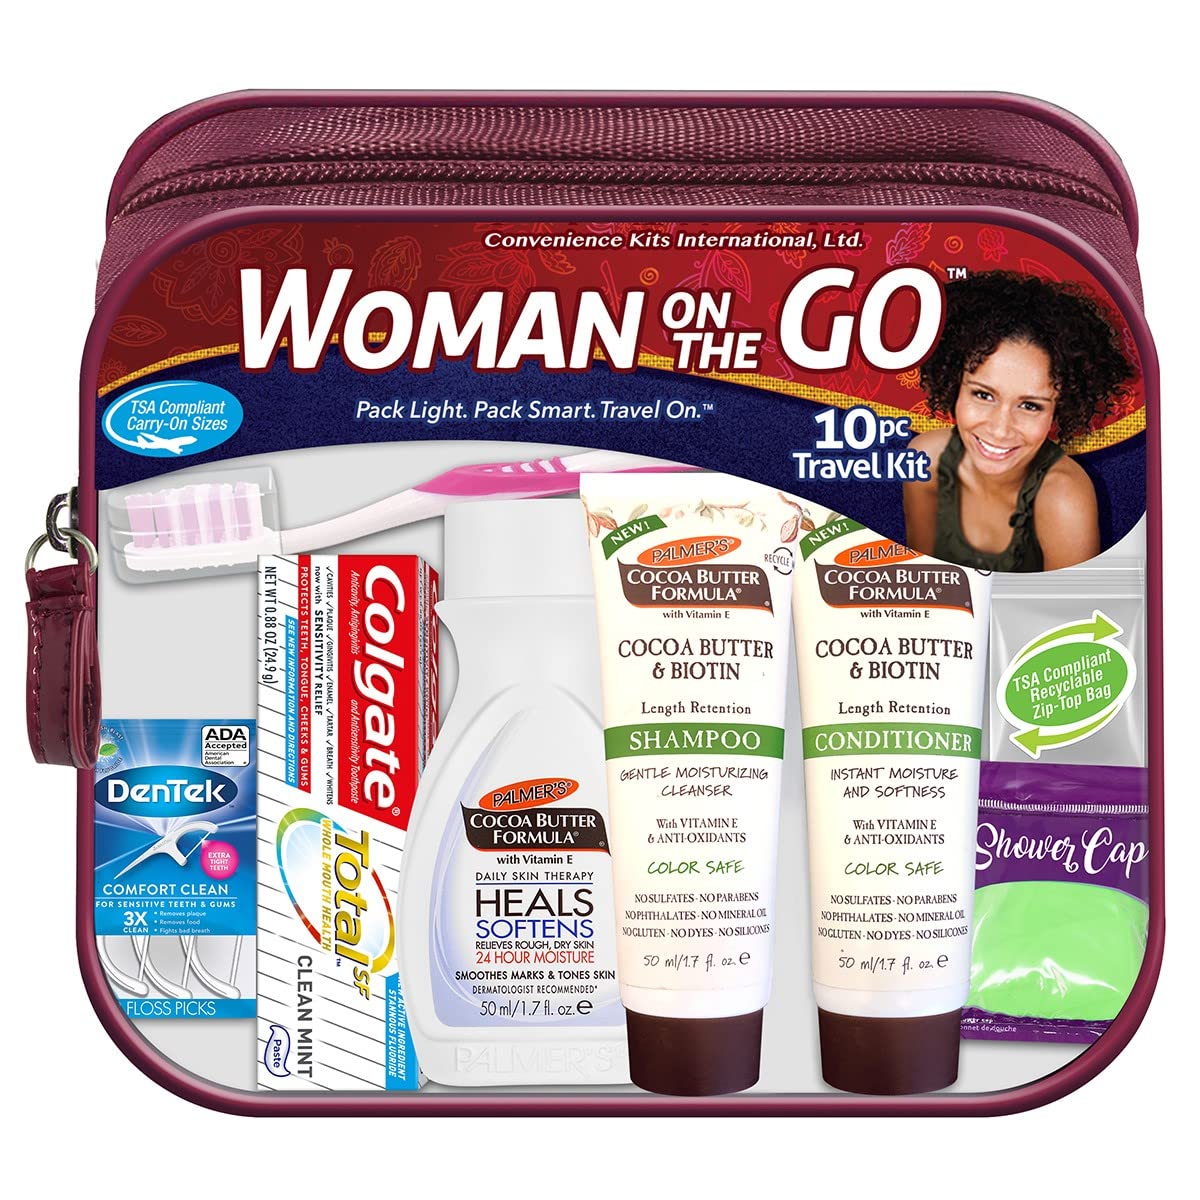 Convenience Kits International Women's Multicultural 10 PC Grooming/Hygiene Travel Kit Featuring: Palmer's Travel-Size Hair & Body Products, Beige, (23AZ)